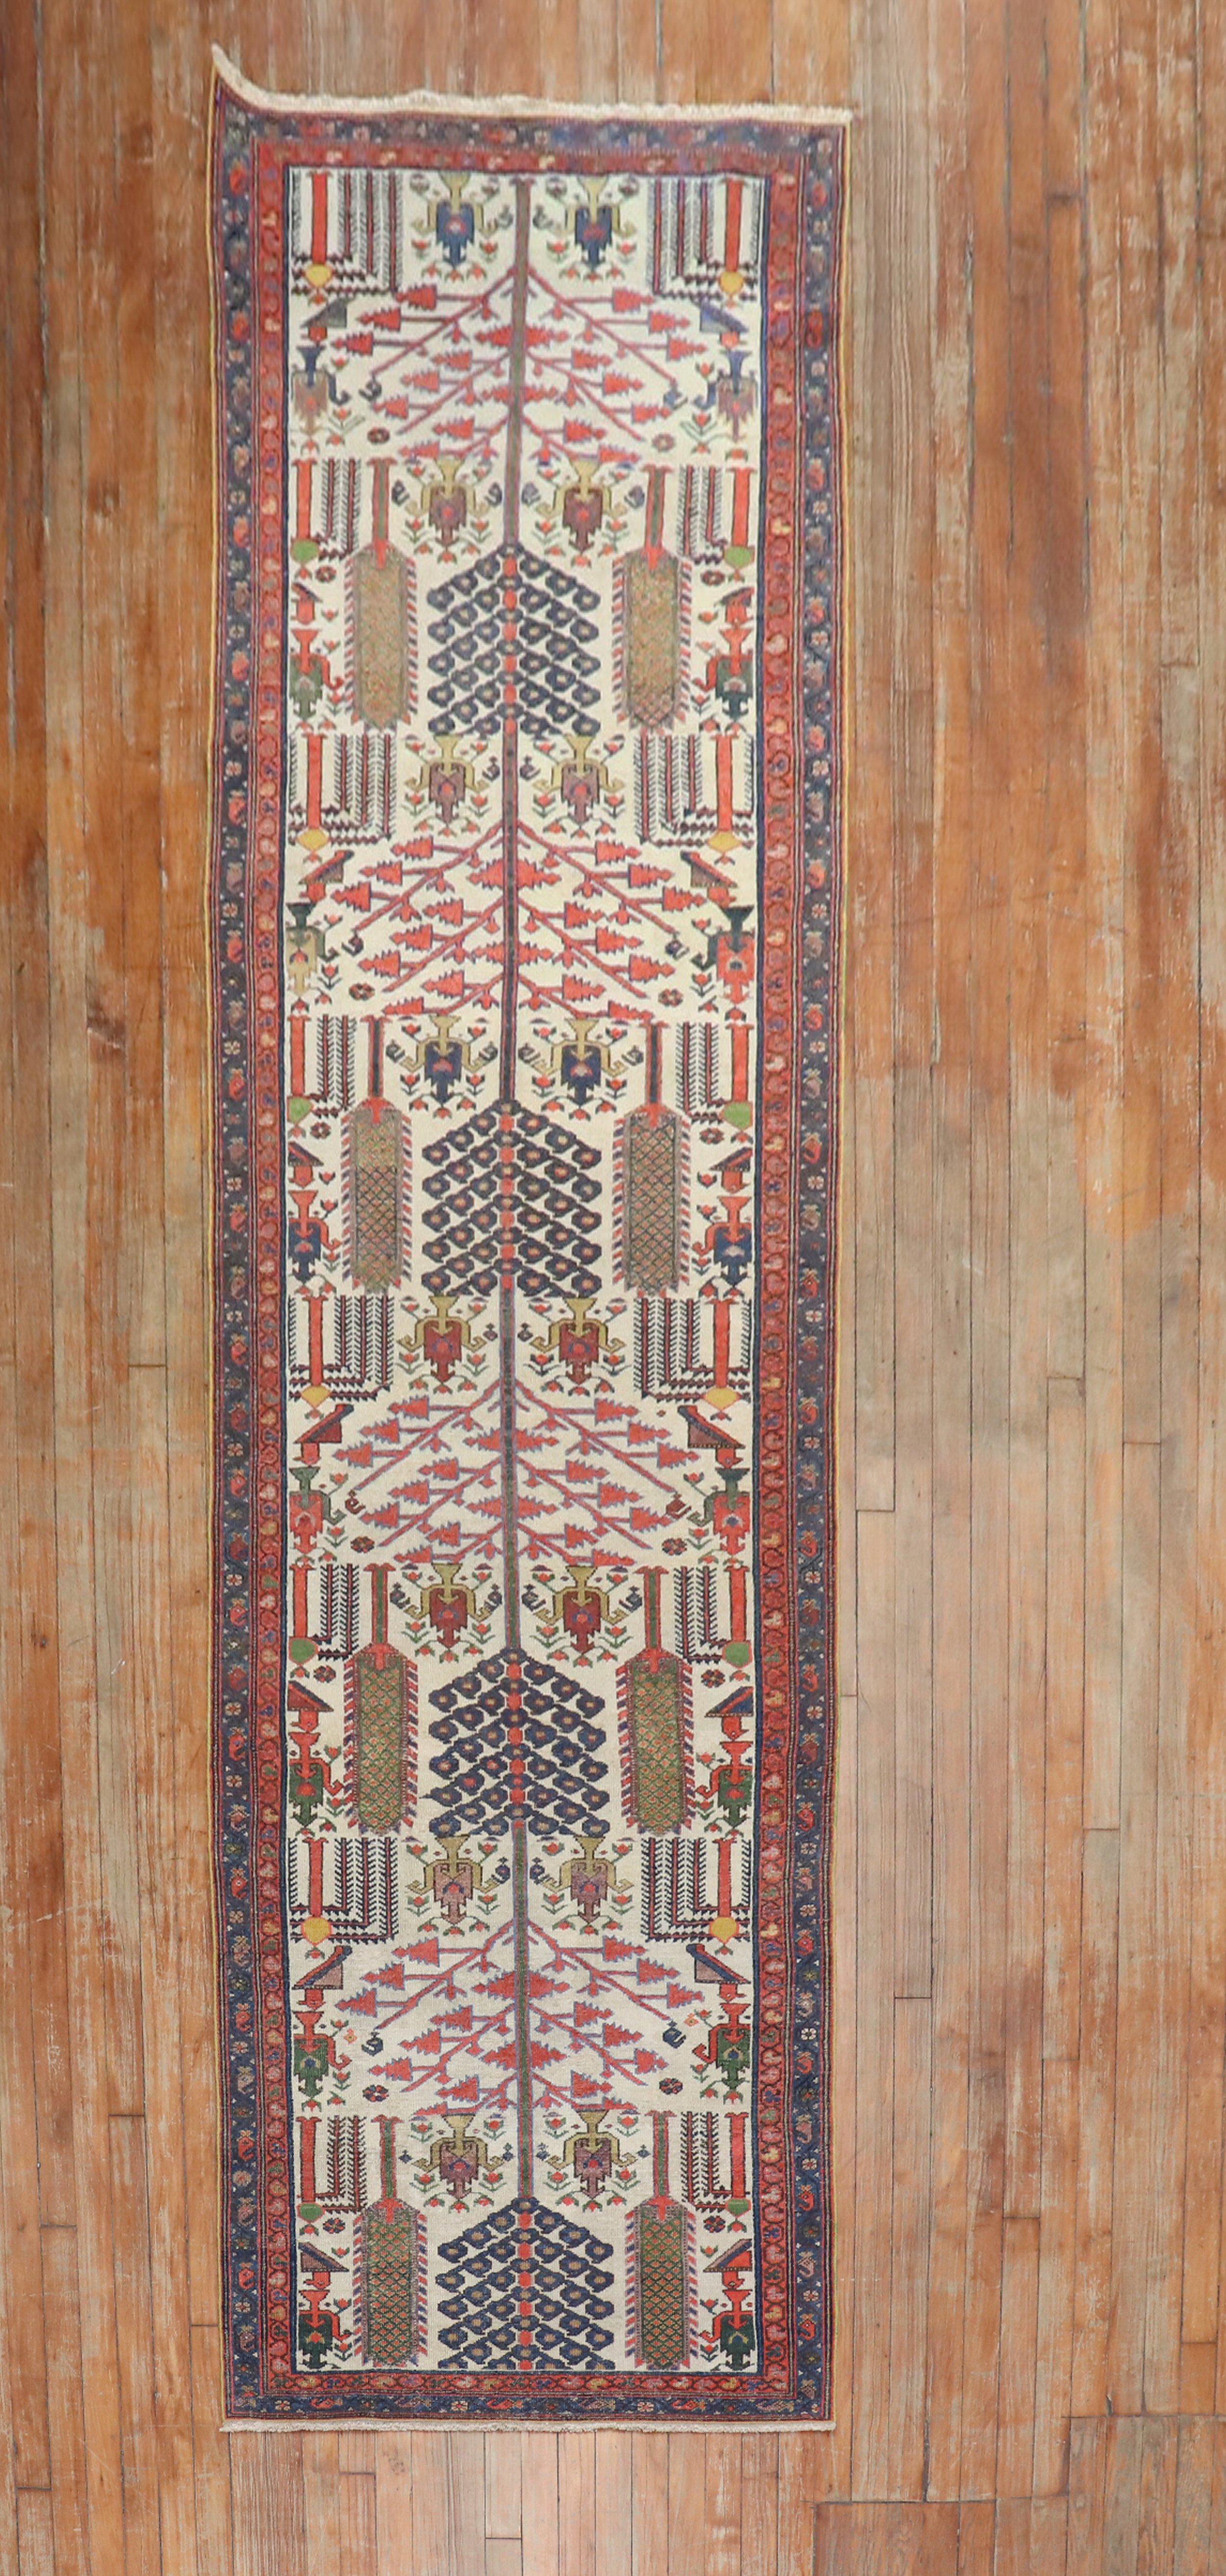 A 20th century tribal highly decorative Persian Malayer runner with a willow tree pattern on a ivory ground. Great quality and great condition. 

Measures: 3'2